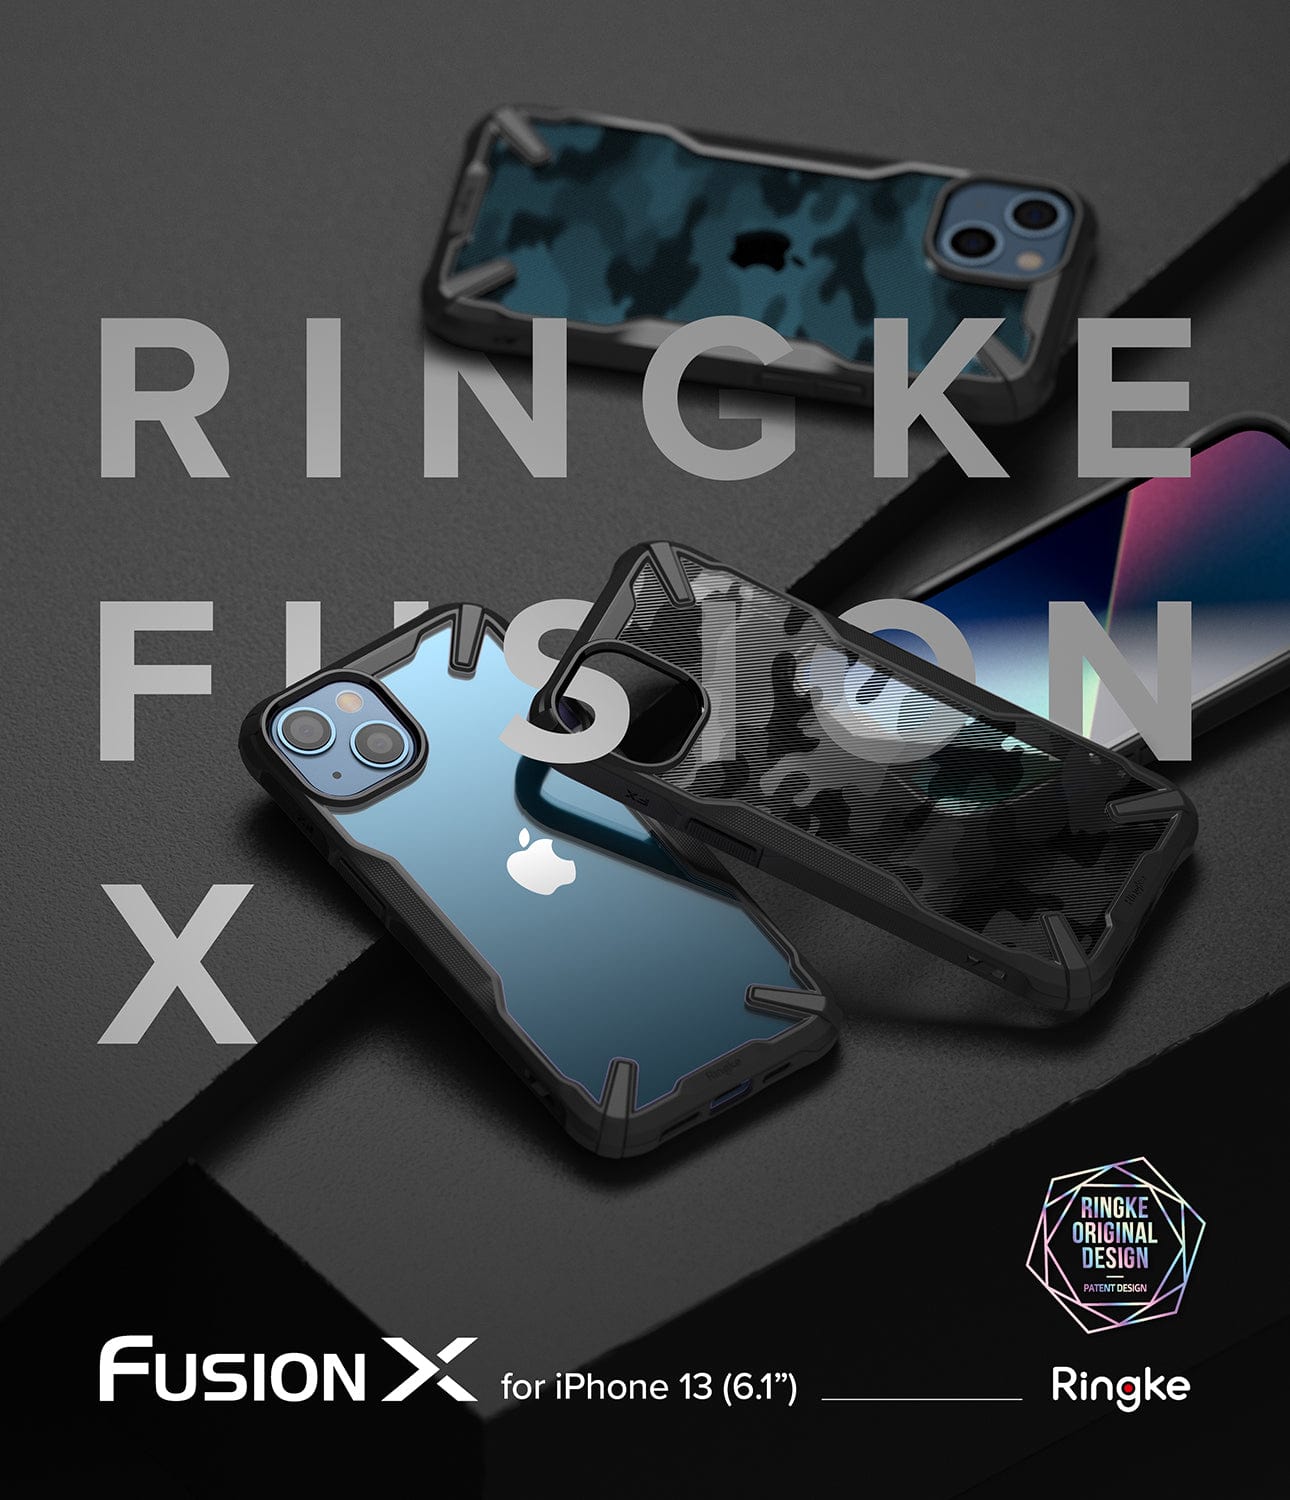 Ringke FusionX Case for iPhone 13 6.1 inch 